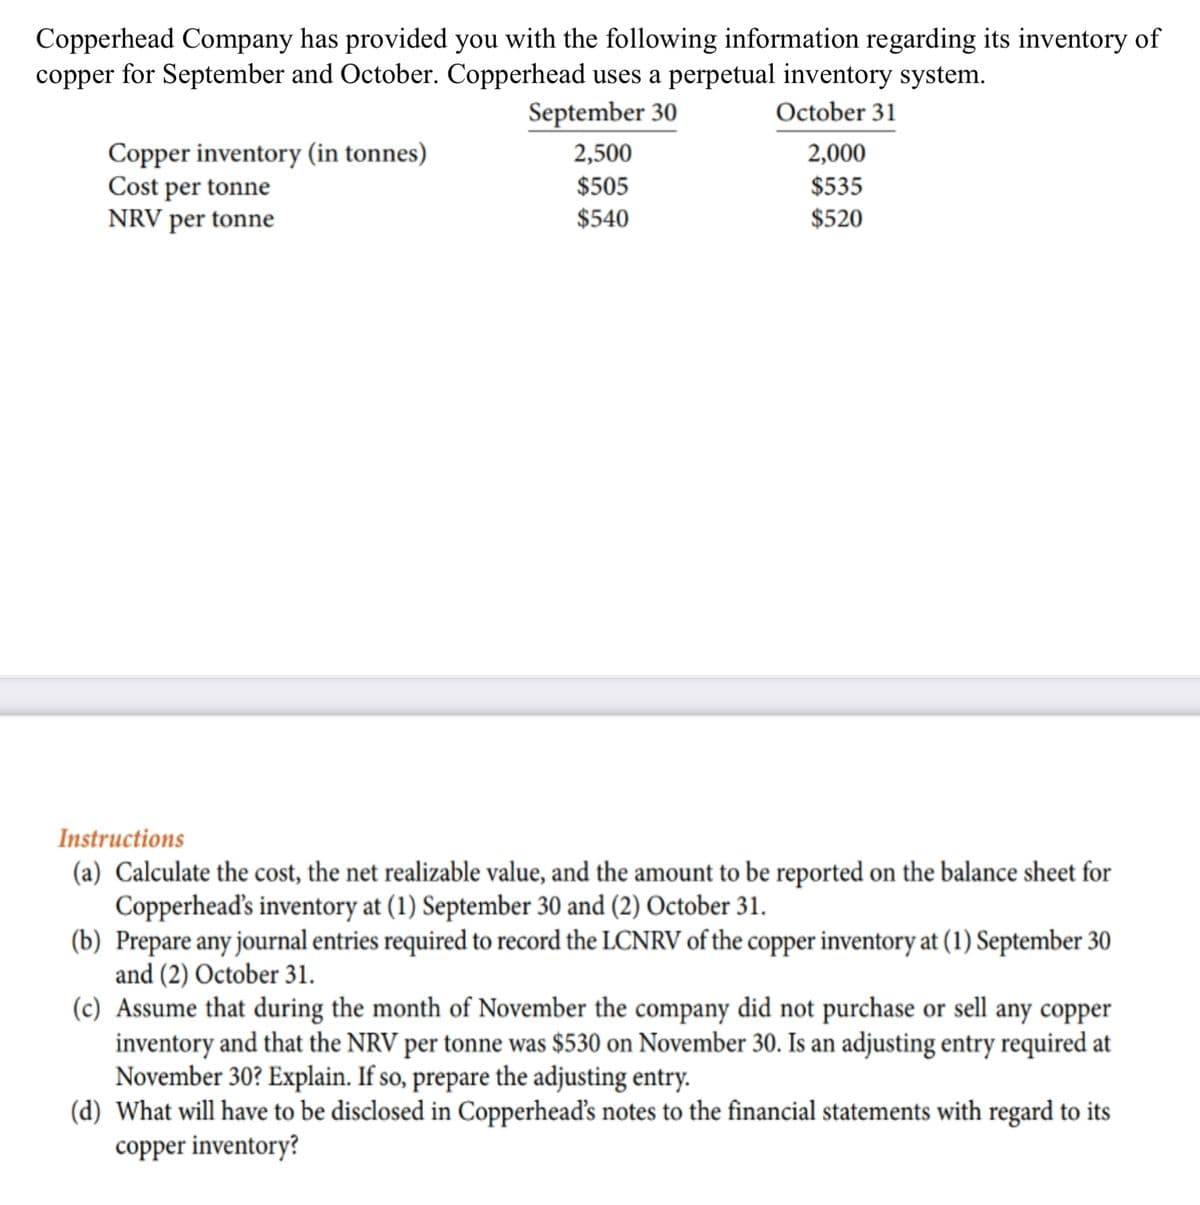 Copperhead Company has provided you with the following information regarding its inventory of
copper for September and October. Copperhead uses a perpetual inventory system.
September 30
October 31
Copper inventory (in tonnes)
Cost per tonne
NRV per tonne
2,500
2,000
$505
$535
$540
$520
Instructions
(a) Calculate the cost, the net realizable value, and the amount to be reported on the balance sheet for
Copperhead's inventory at (1) September 30 and (2) October 31.
(b) Prepare any journal entries required to record the LCNRV of the copper inventory at (1) September 30
and (2) October 31.
(c) Assume that during the month of November the company did not purchase or sell any copper
inventory and that the NRV per tonne was $530 on November 30. Is an adjusting entry required at
November 30? Explain. If so, prepare the adjusting entry.
(d) What will have to be disclosed in Copperheads notes to the financial statements with regard to its
copper inventory?
